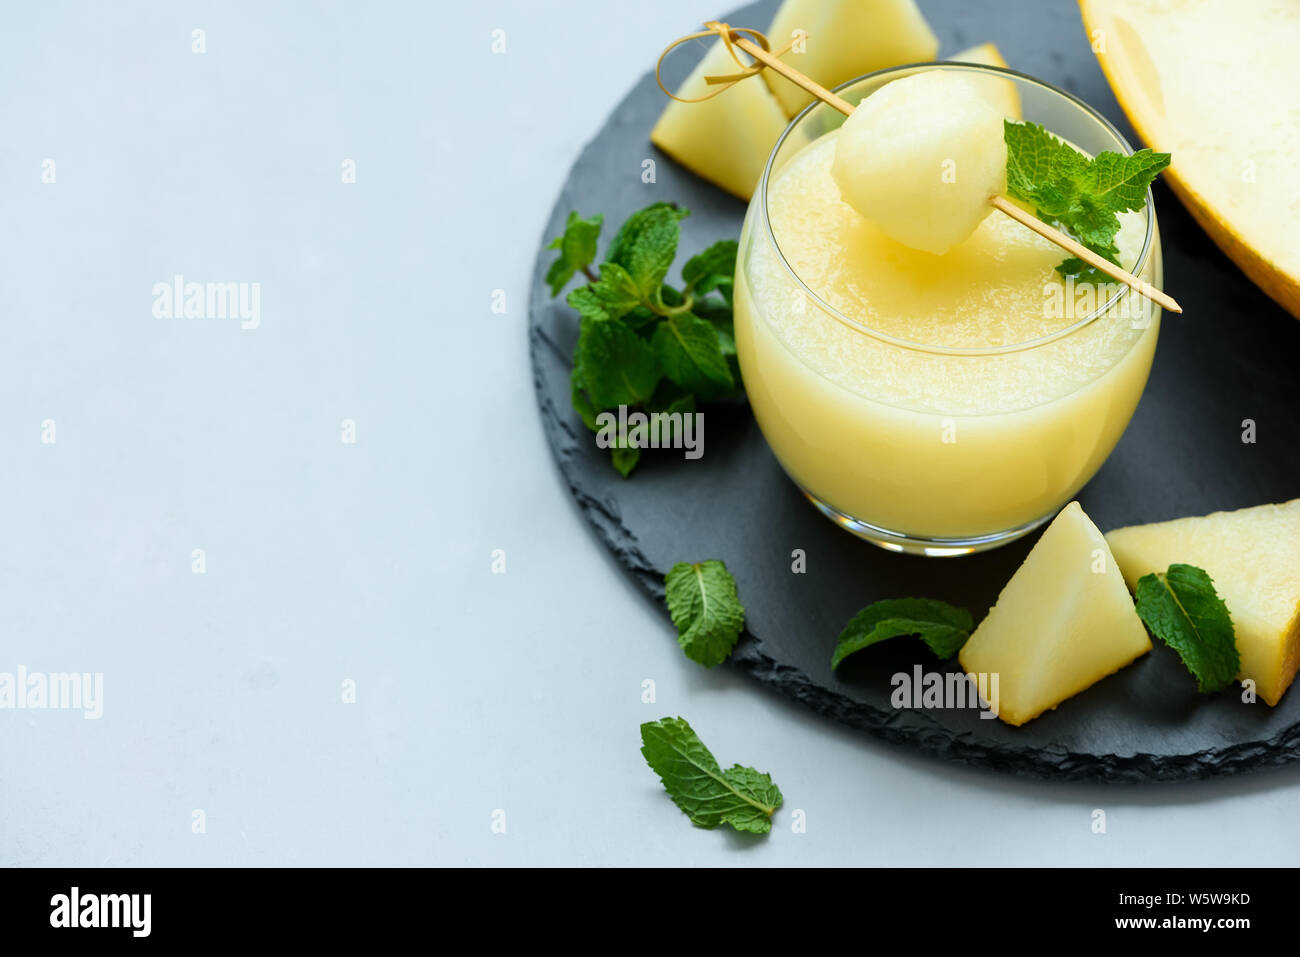 Cold fresh melon smoothie with melon ball and mint leaves on gray wooden background. Summer drink. Healthy food concept. Soft focus Stock Photo